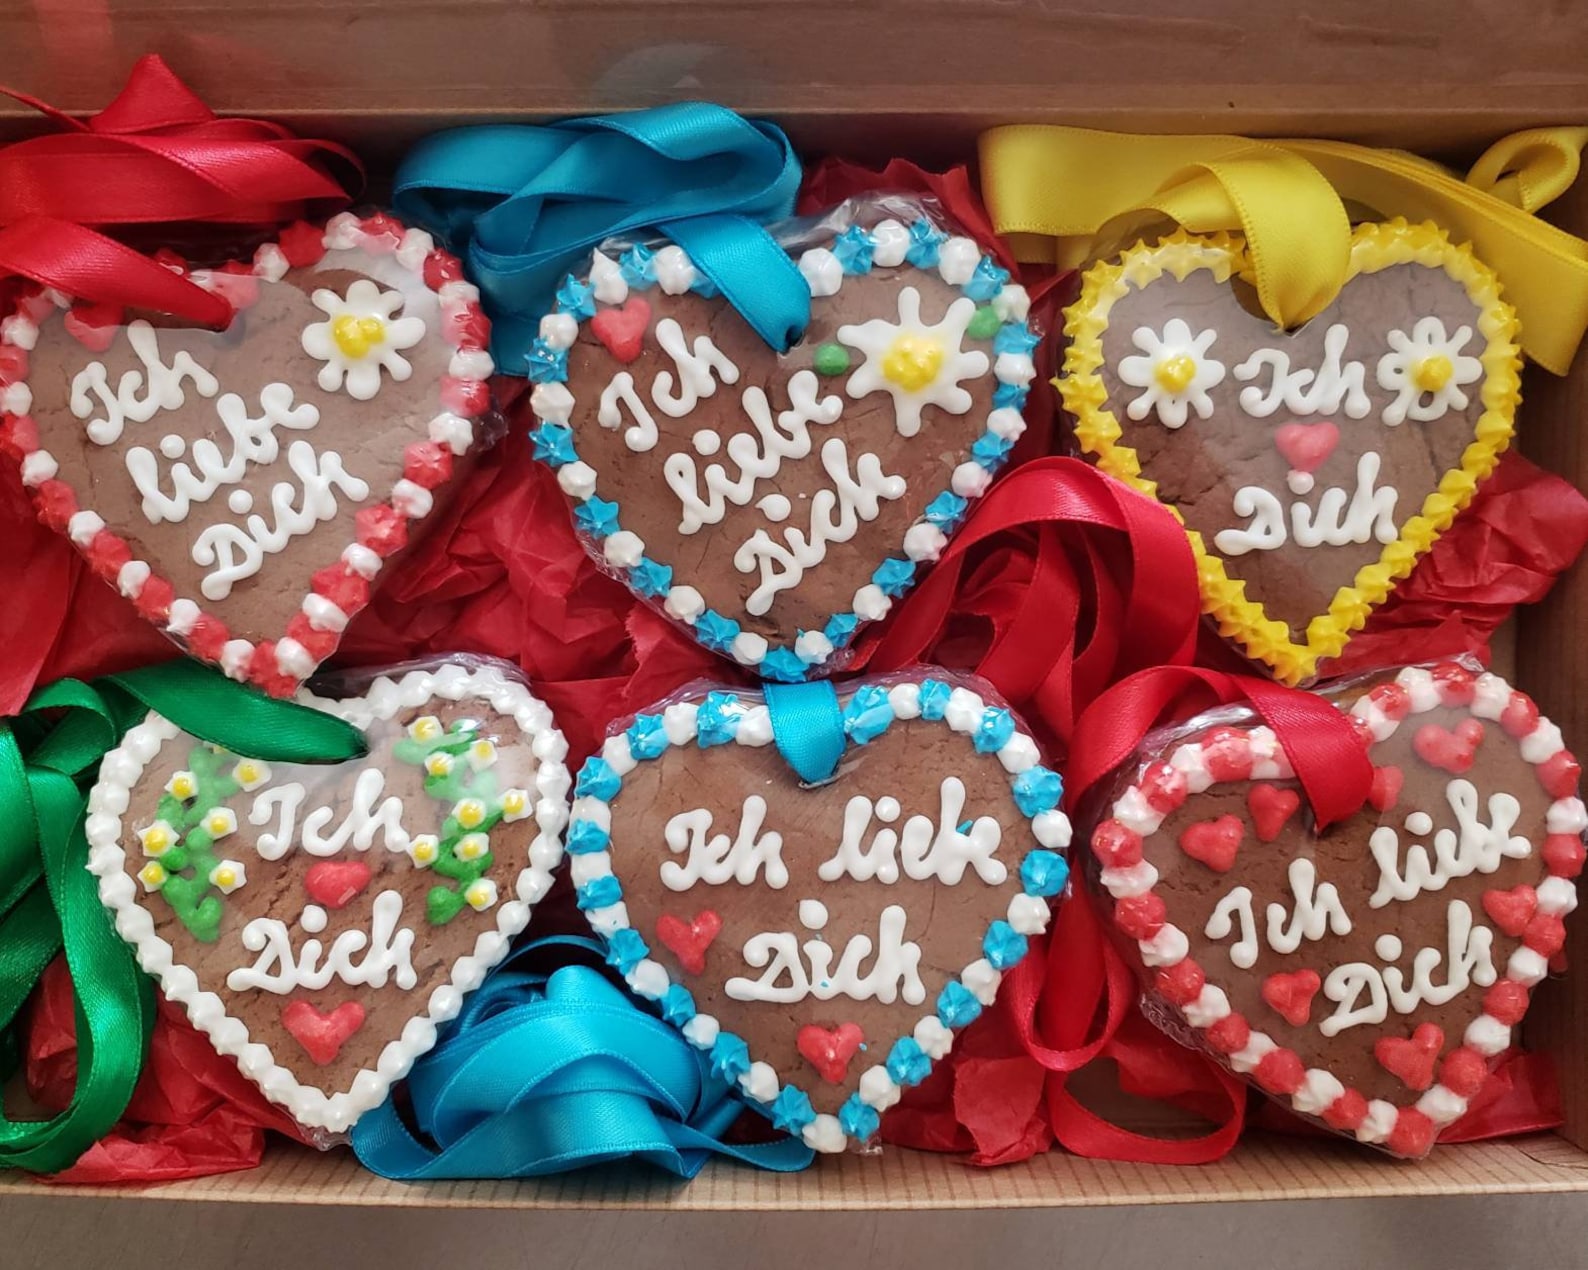 6 Gingerbread Conversation Hearts - 3 inch - in a beautiful gift box